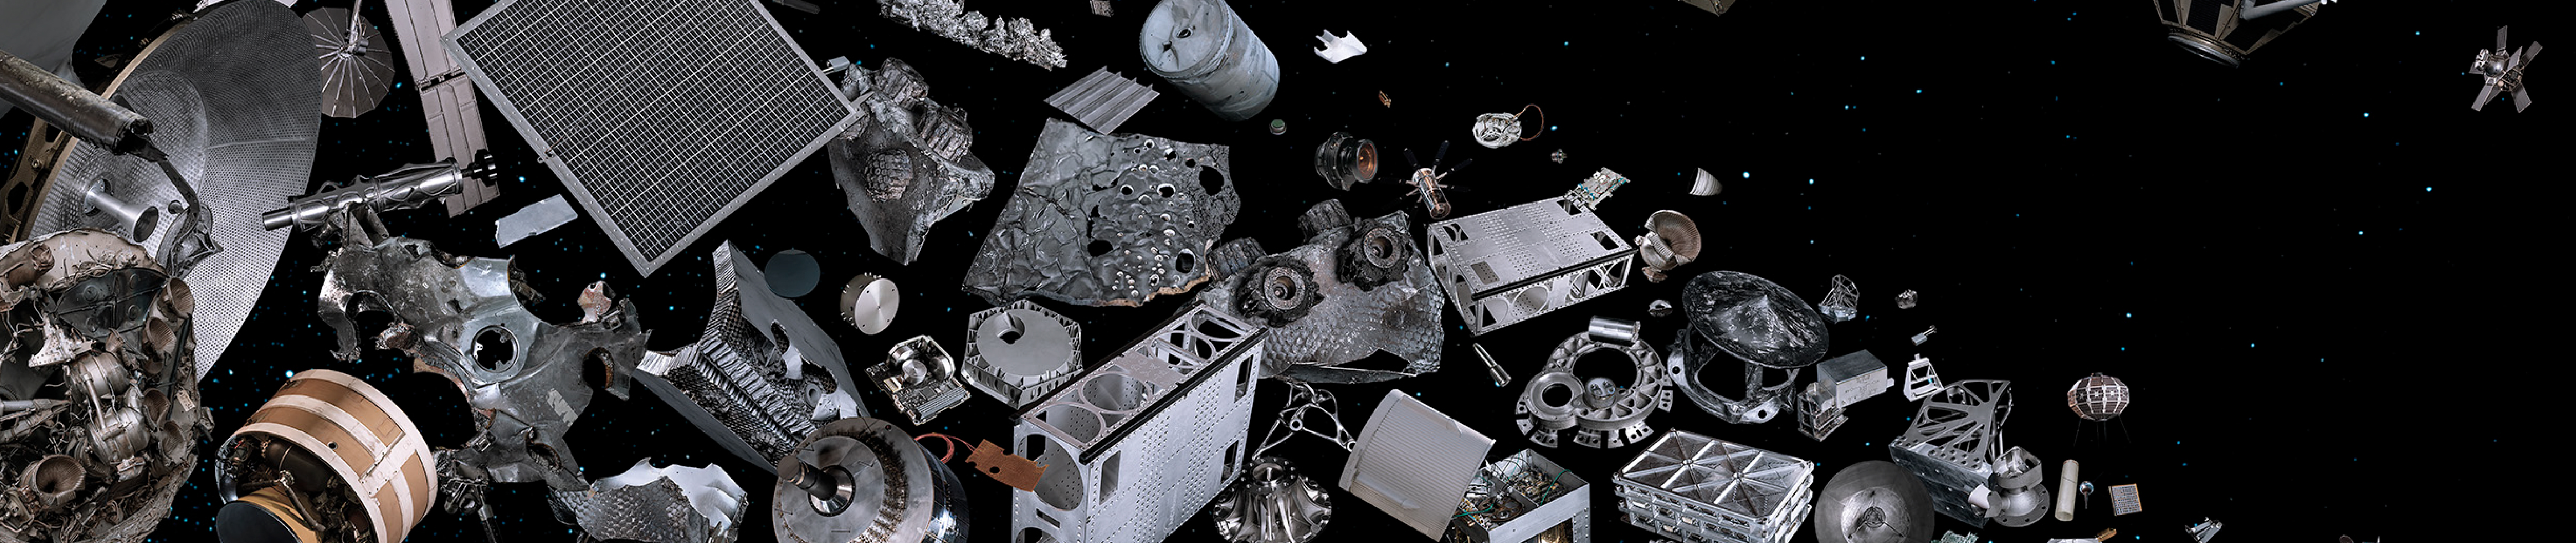 Various grey objects, space junk, are floating in space. Space is black and there are stars twinkling in the distance